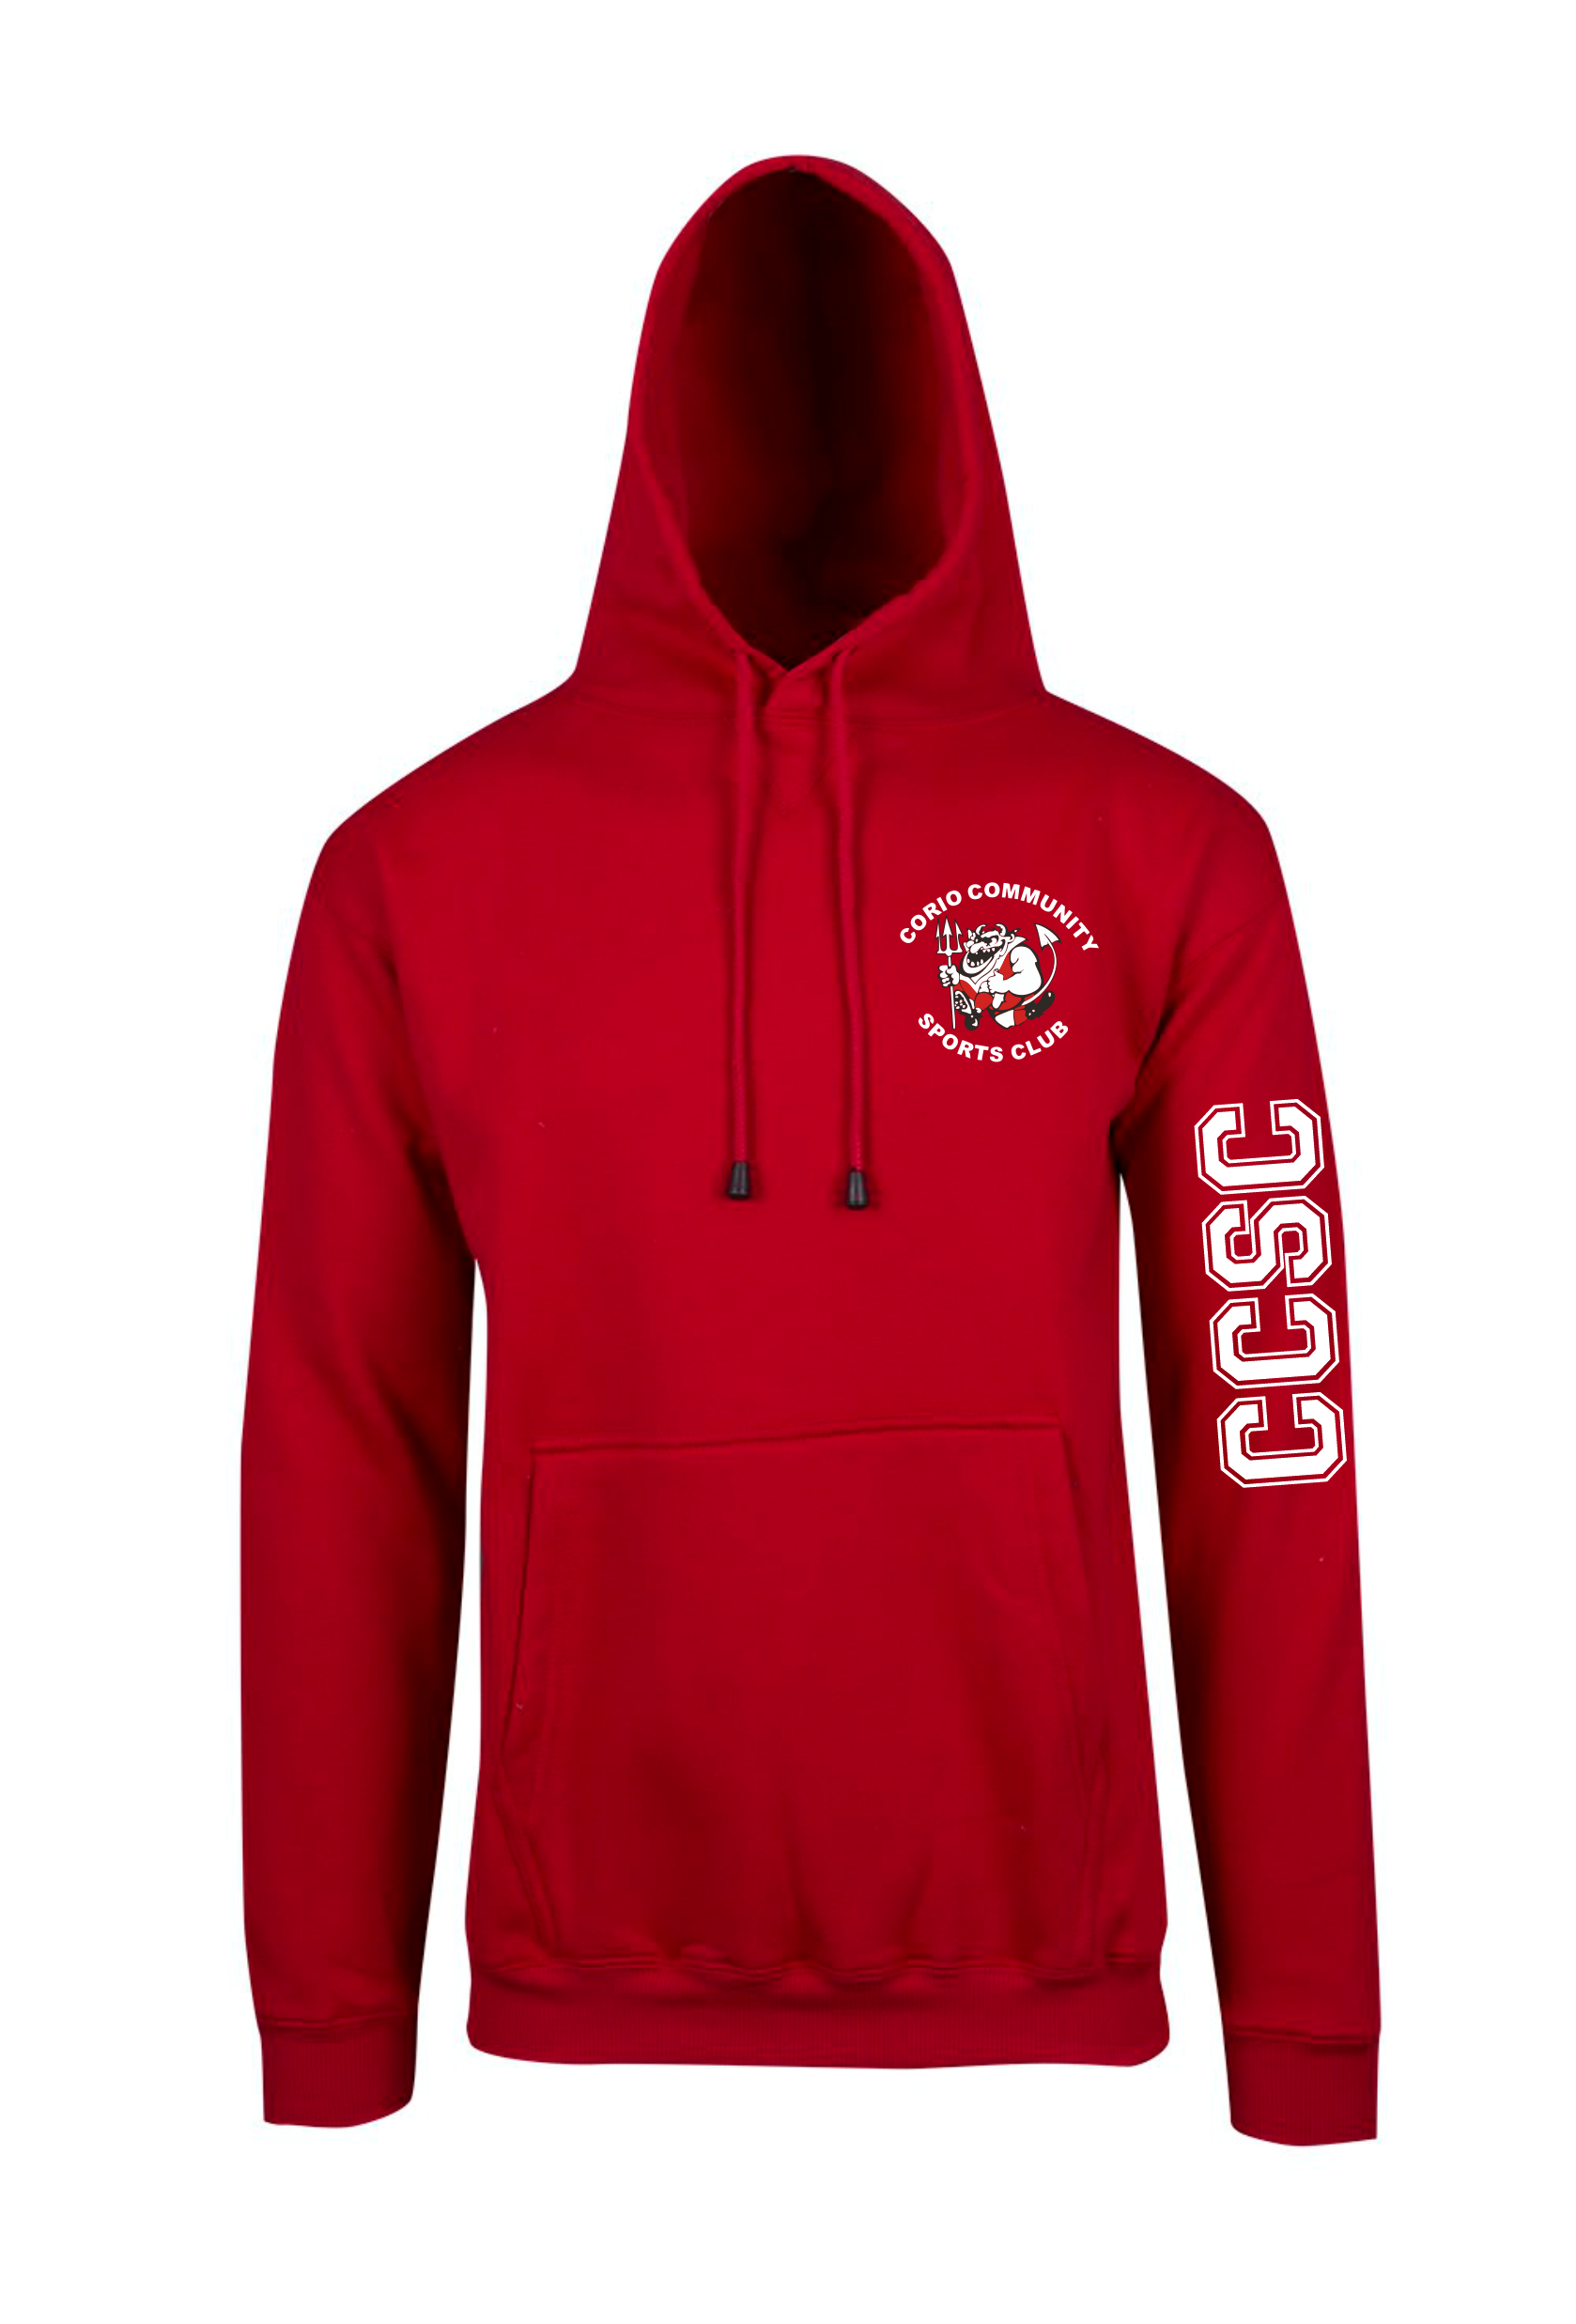 Unisex Red Hoodie – CCSC on Arm